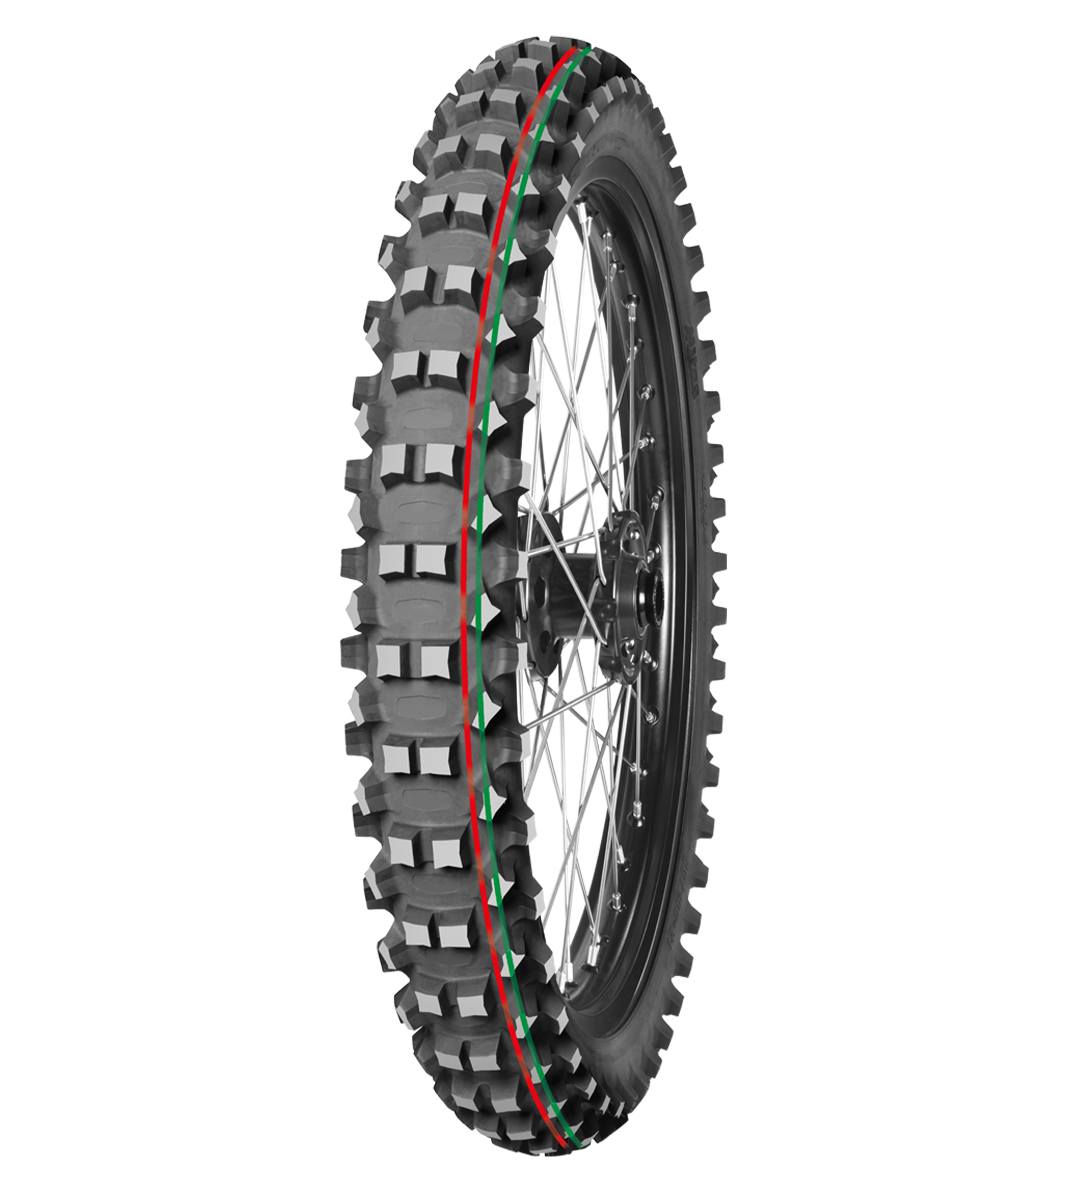 Mitas TERRA FORCE-MX MH 60/100-14 Motocross Competition Off-Road MEDIUM TO HARD 29M Red &amp; Green Tube Front Tire, 226044, 60/100-14, Front, Motocross, Motocross Competition, Off-Road, Terra Force, Terra Force-MX MH, Trail, Tires - Imported and distributed in North &amp; South America by Lindeco Genuine Powersports - Premier Powersports Equipment and Accessories for Motorcycle Enthusiasts, Professional Riders and Dealers.